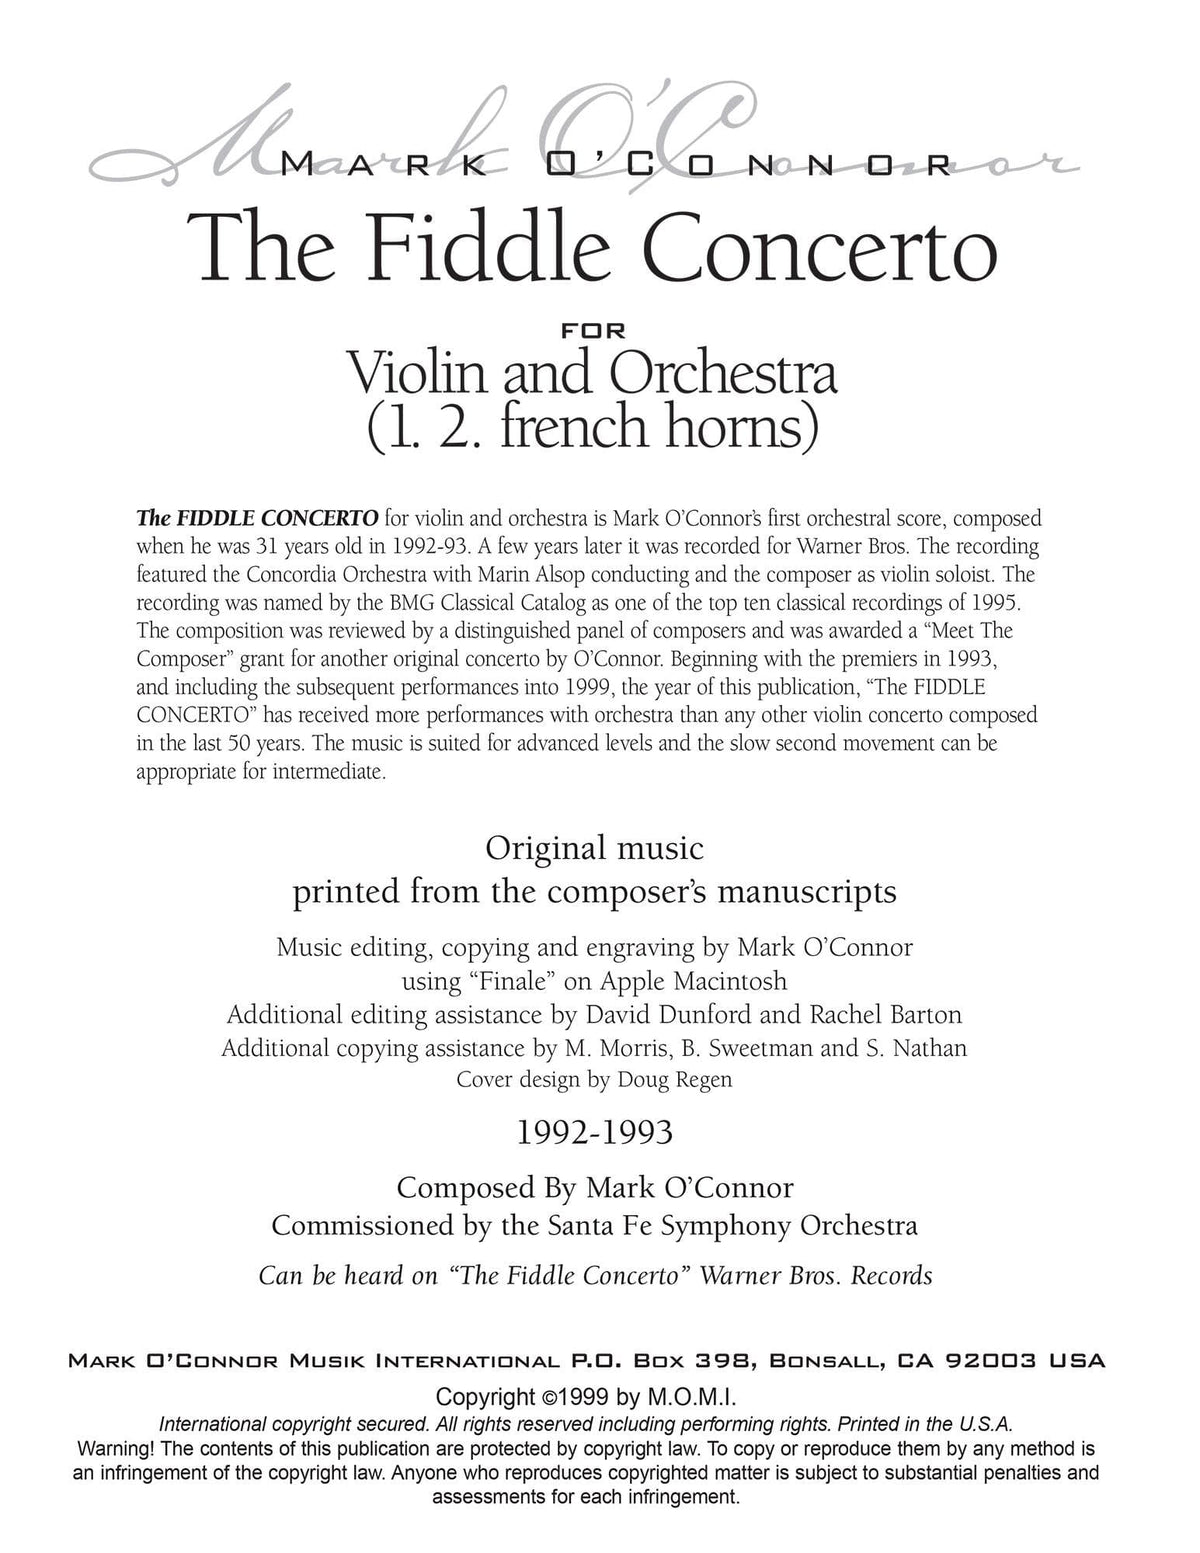 O'Connor, Mark - The FIDDLE CONCERTO for Violin and Orchestra - Brass Parts - Digital Download